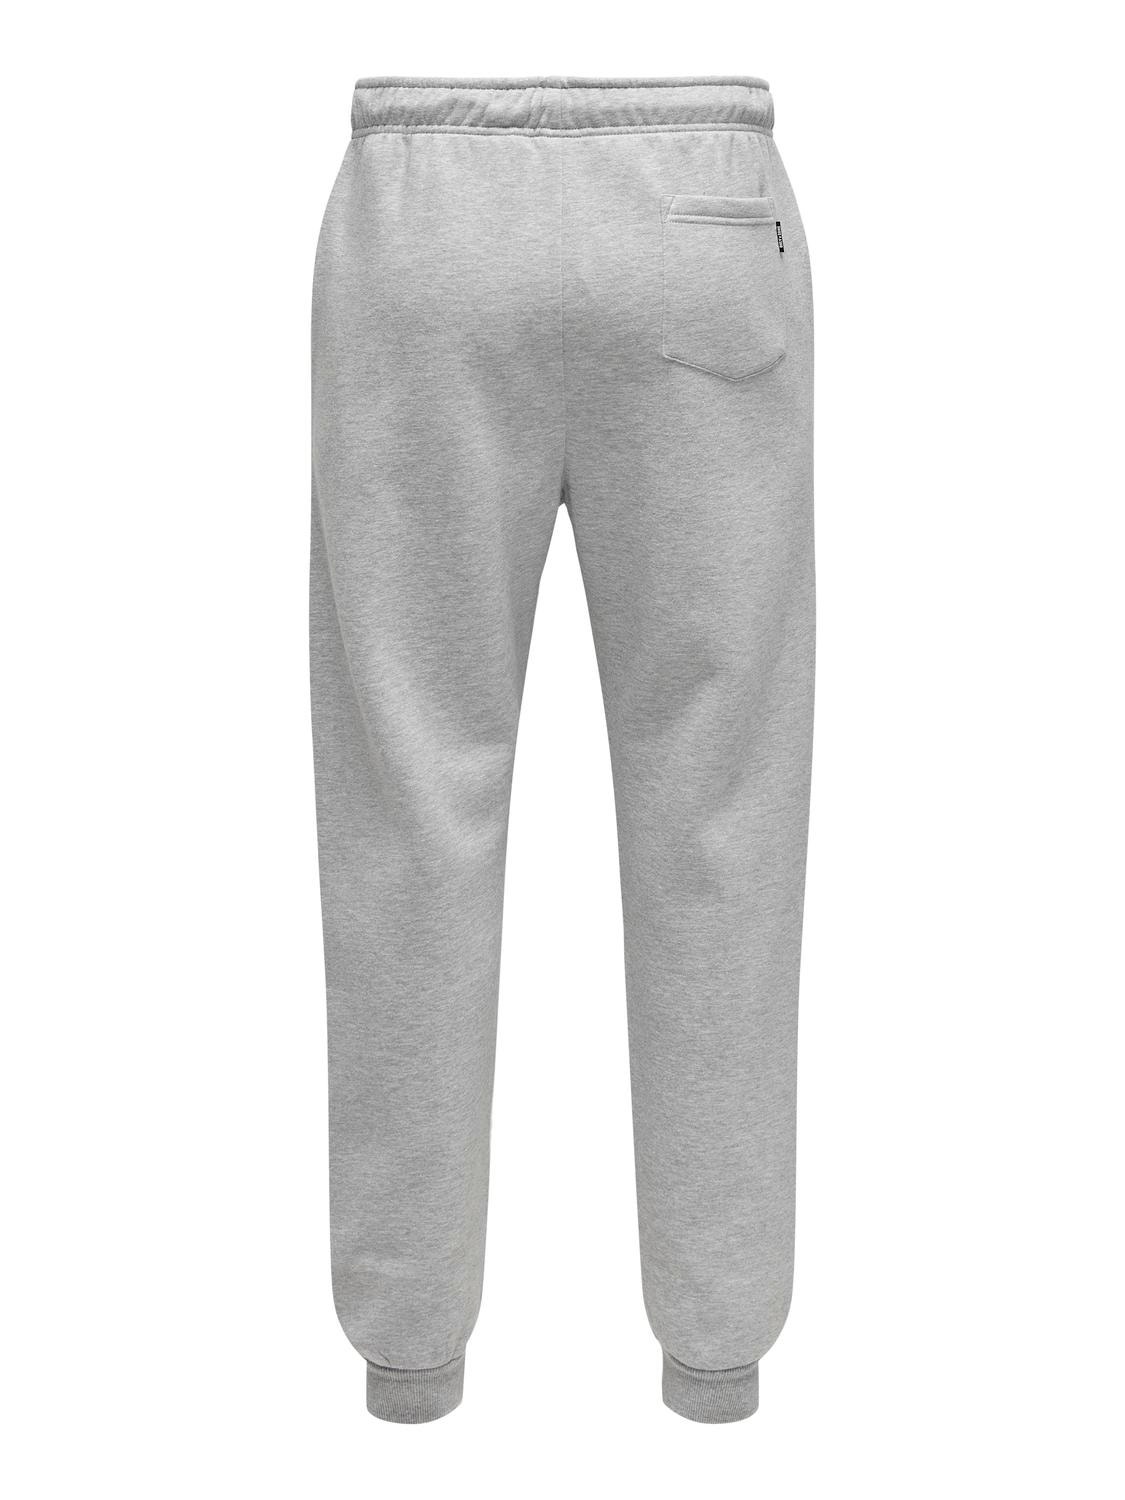 Juniors' Sueded Fleece Sweatpants with Banded Bottoms, LG 11-13,Light Grey  : Clothing, Shoes & Jewelry 